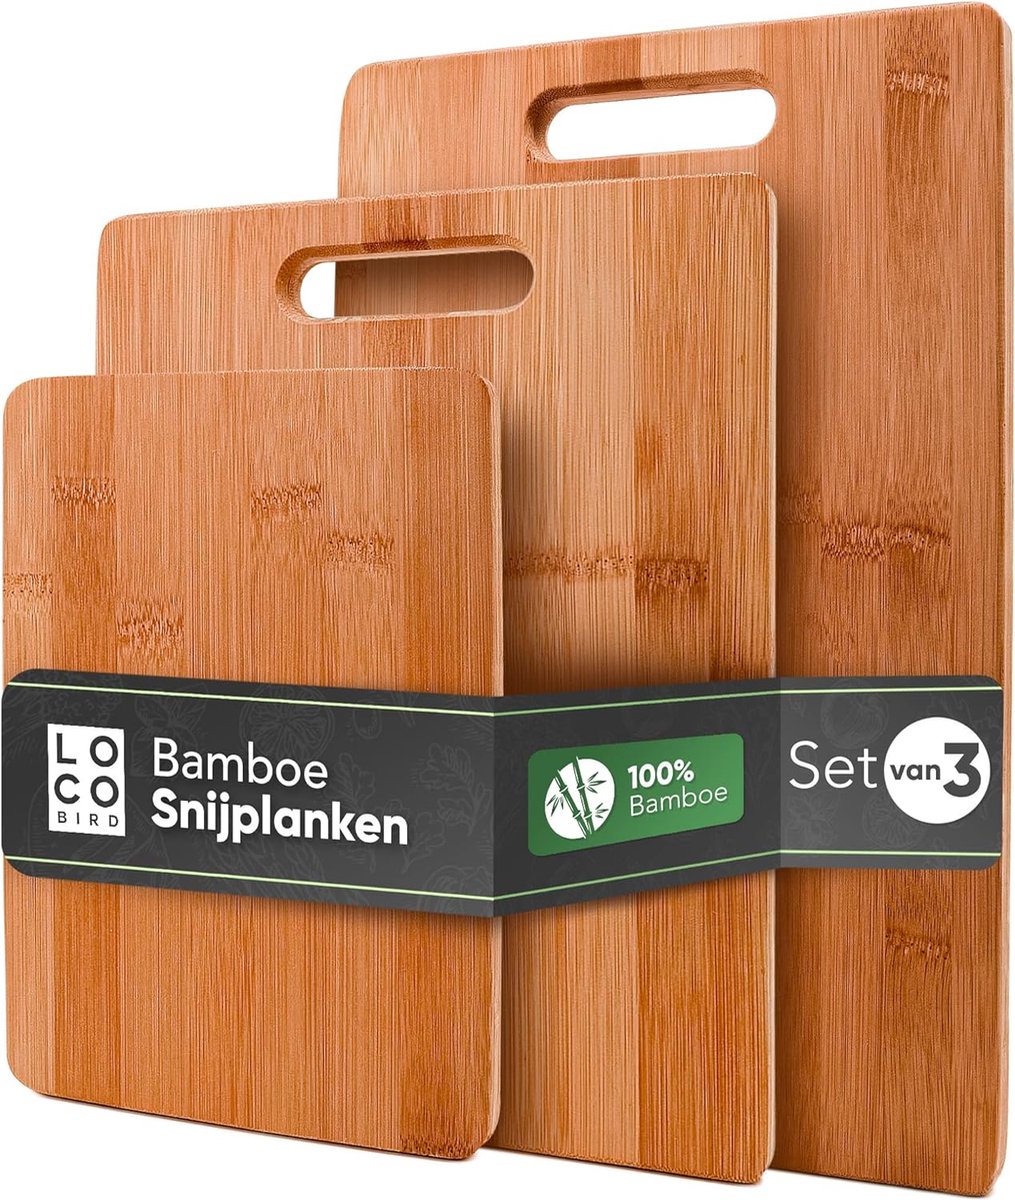 solid bamboo cutting boards set of 3-33x22 / 28x22 / 15x22cm - Wooden kitchen cutting board -